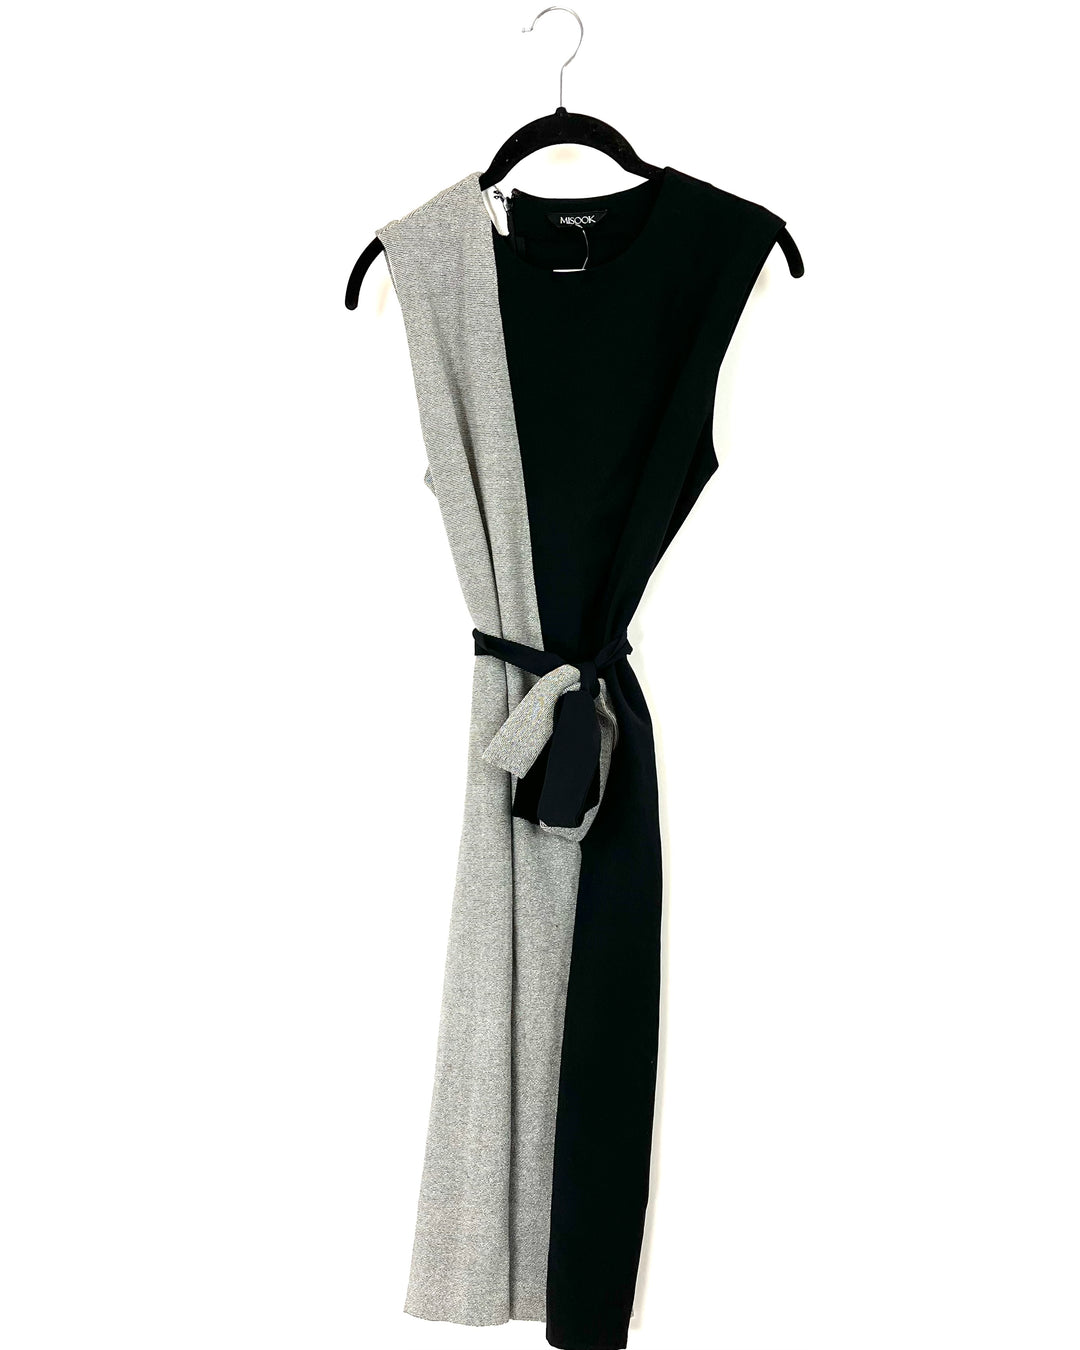 Black And Grey Dress - Size 2-4